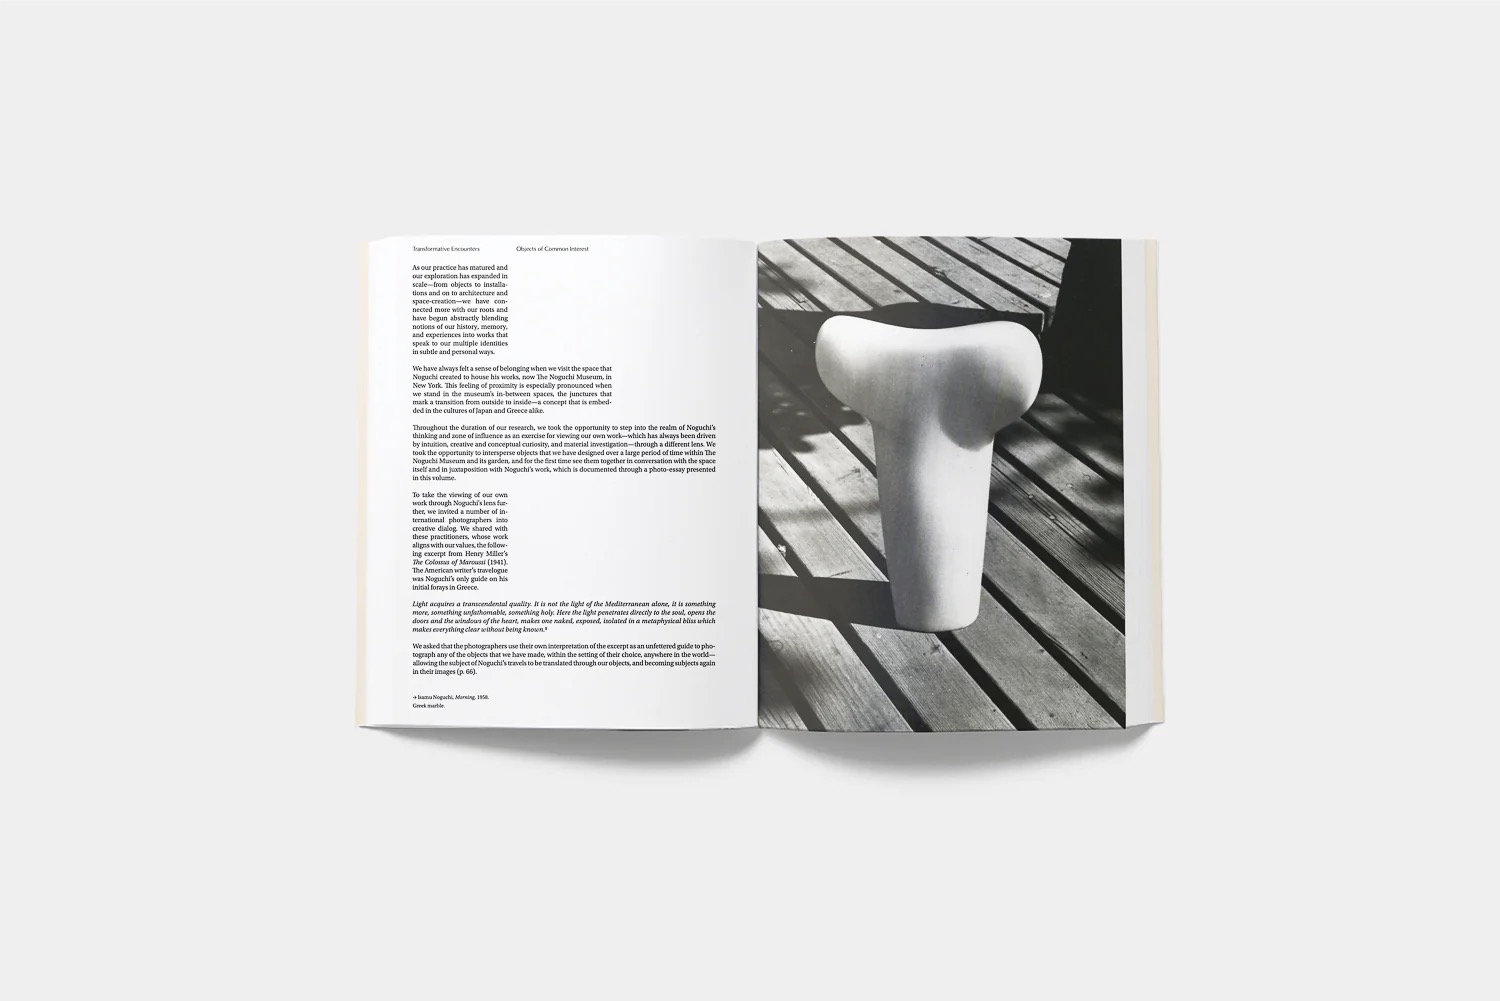 "Noguchi And Greece, Greece And Noguchi" - A Book on the relationship between Isamu Noguchi, one of the most famous artists of the 20th century, and Greece.